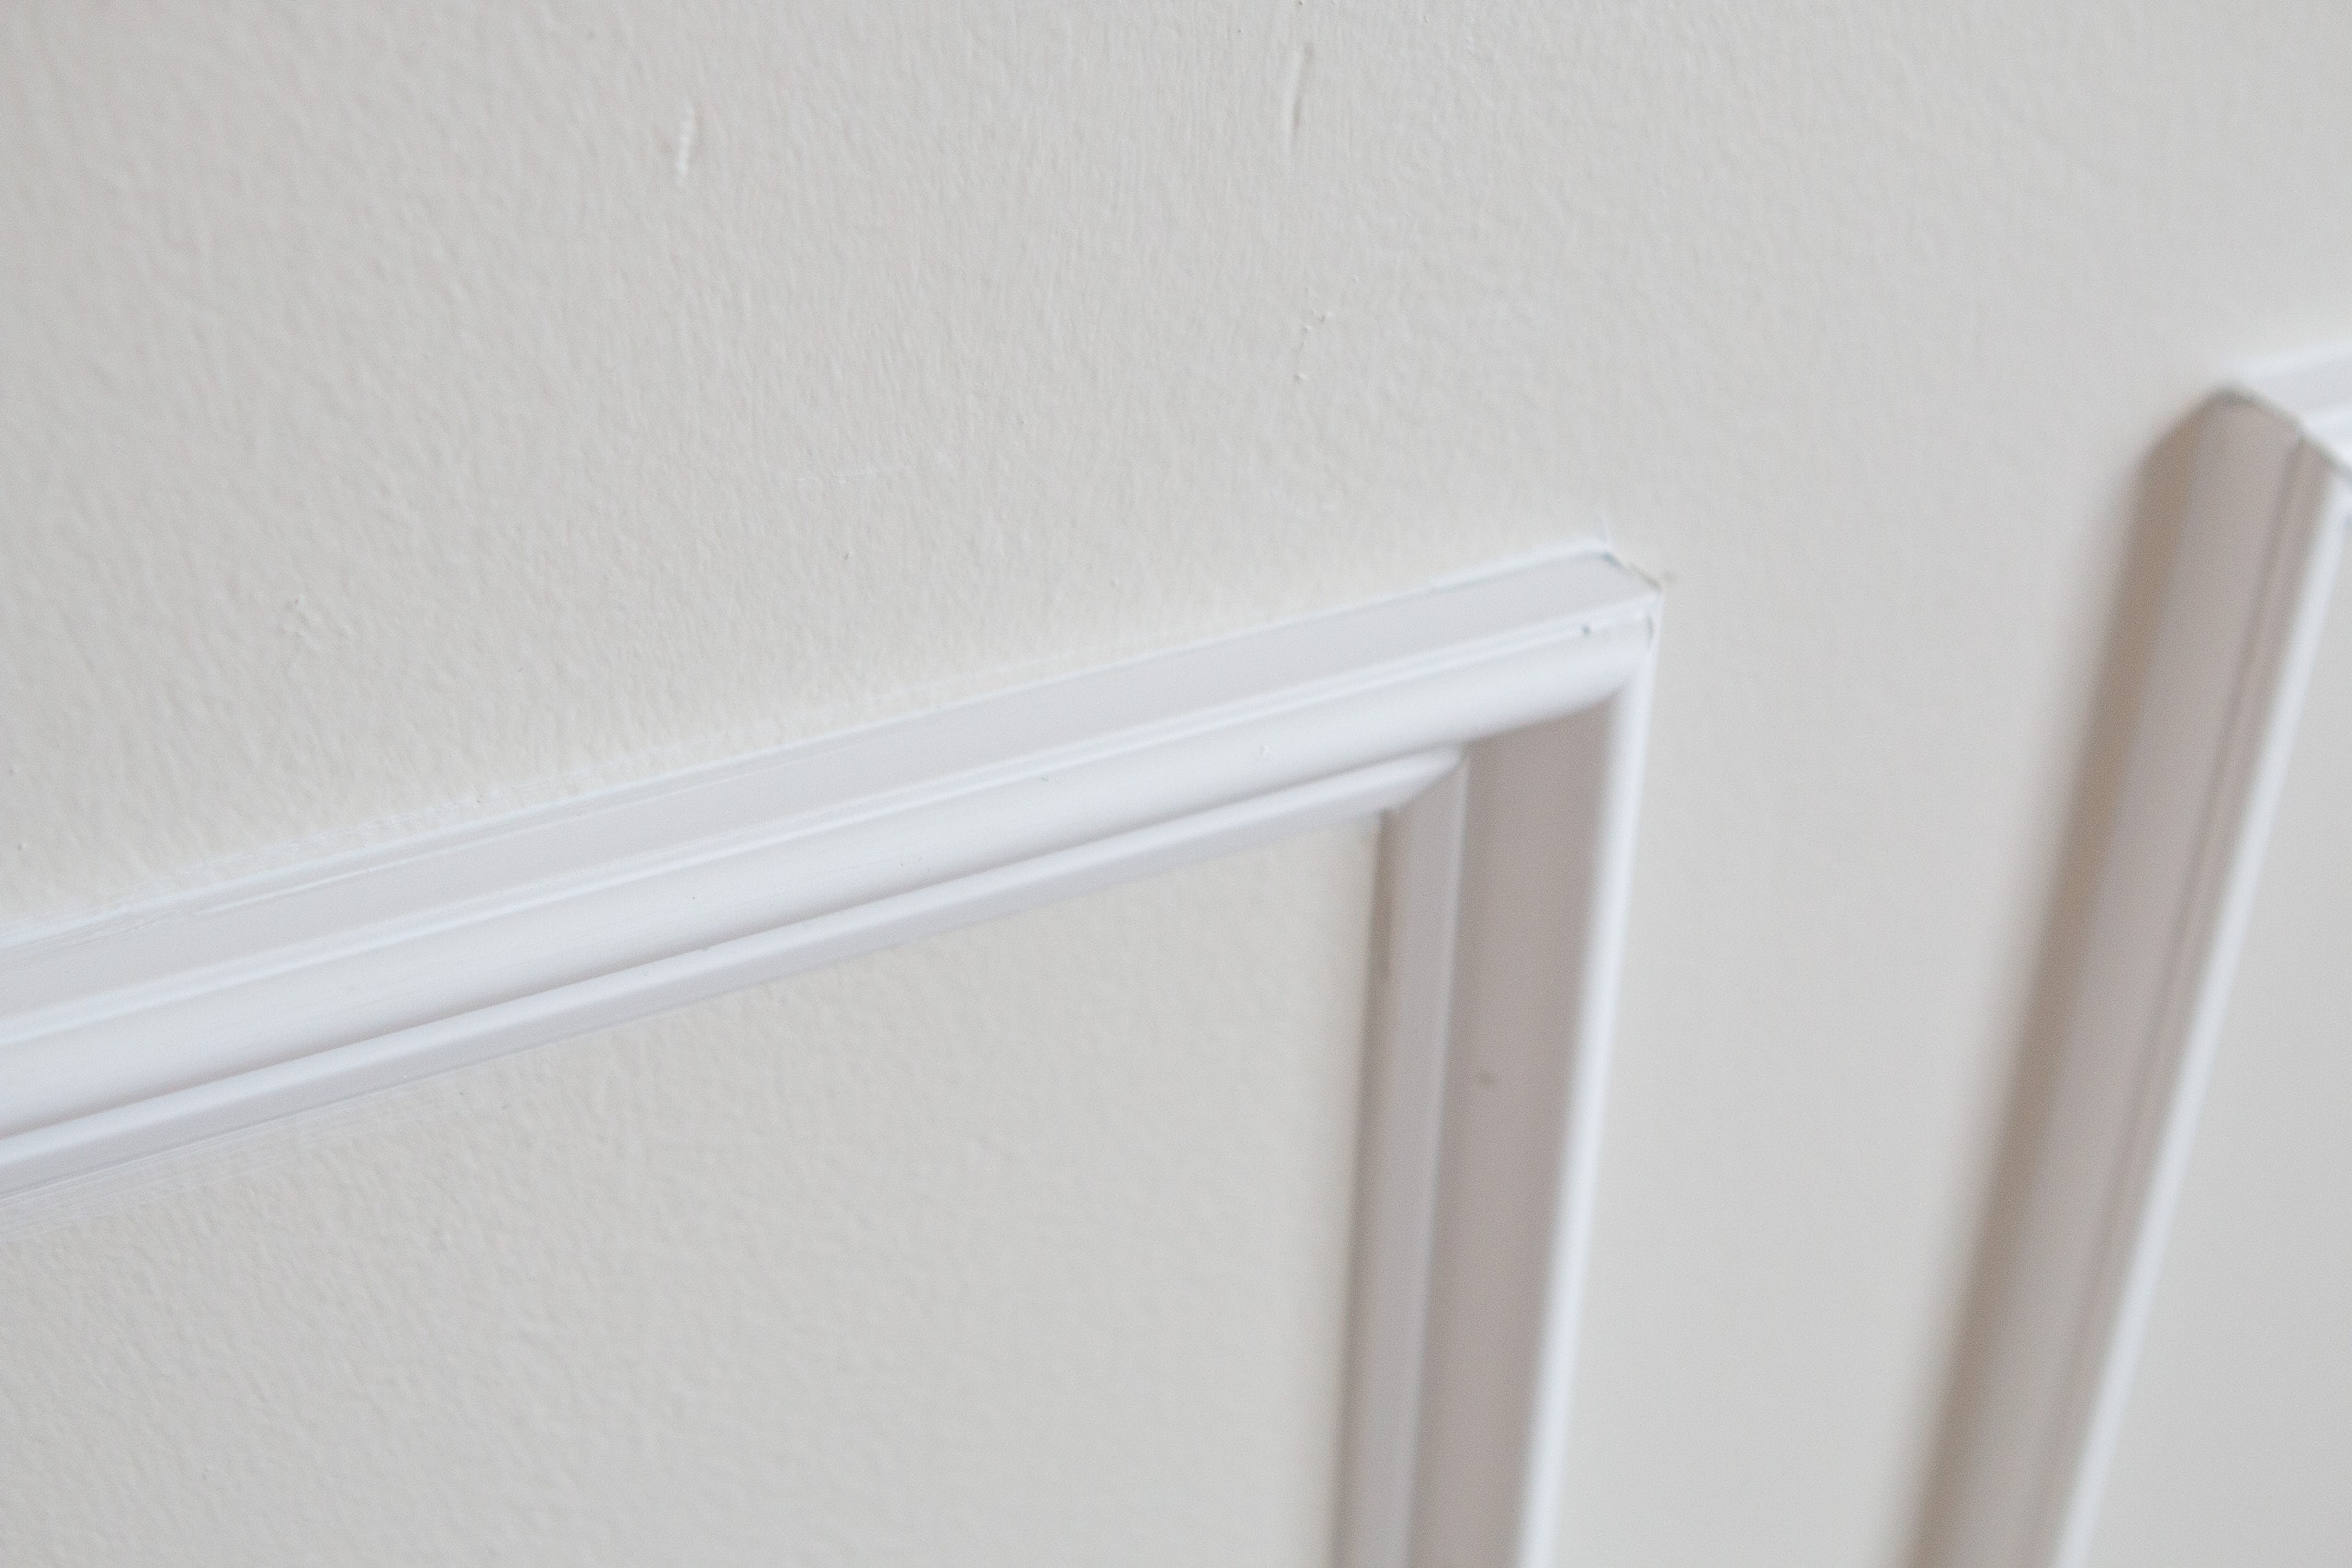 how to caulk picture frame molding